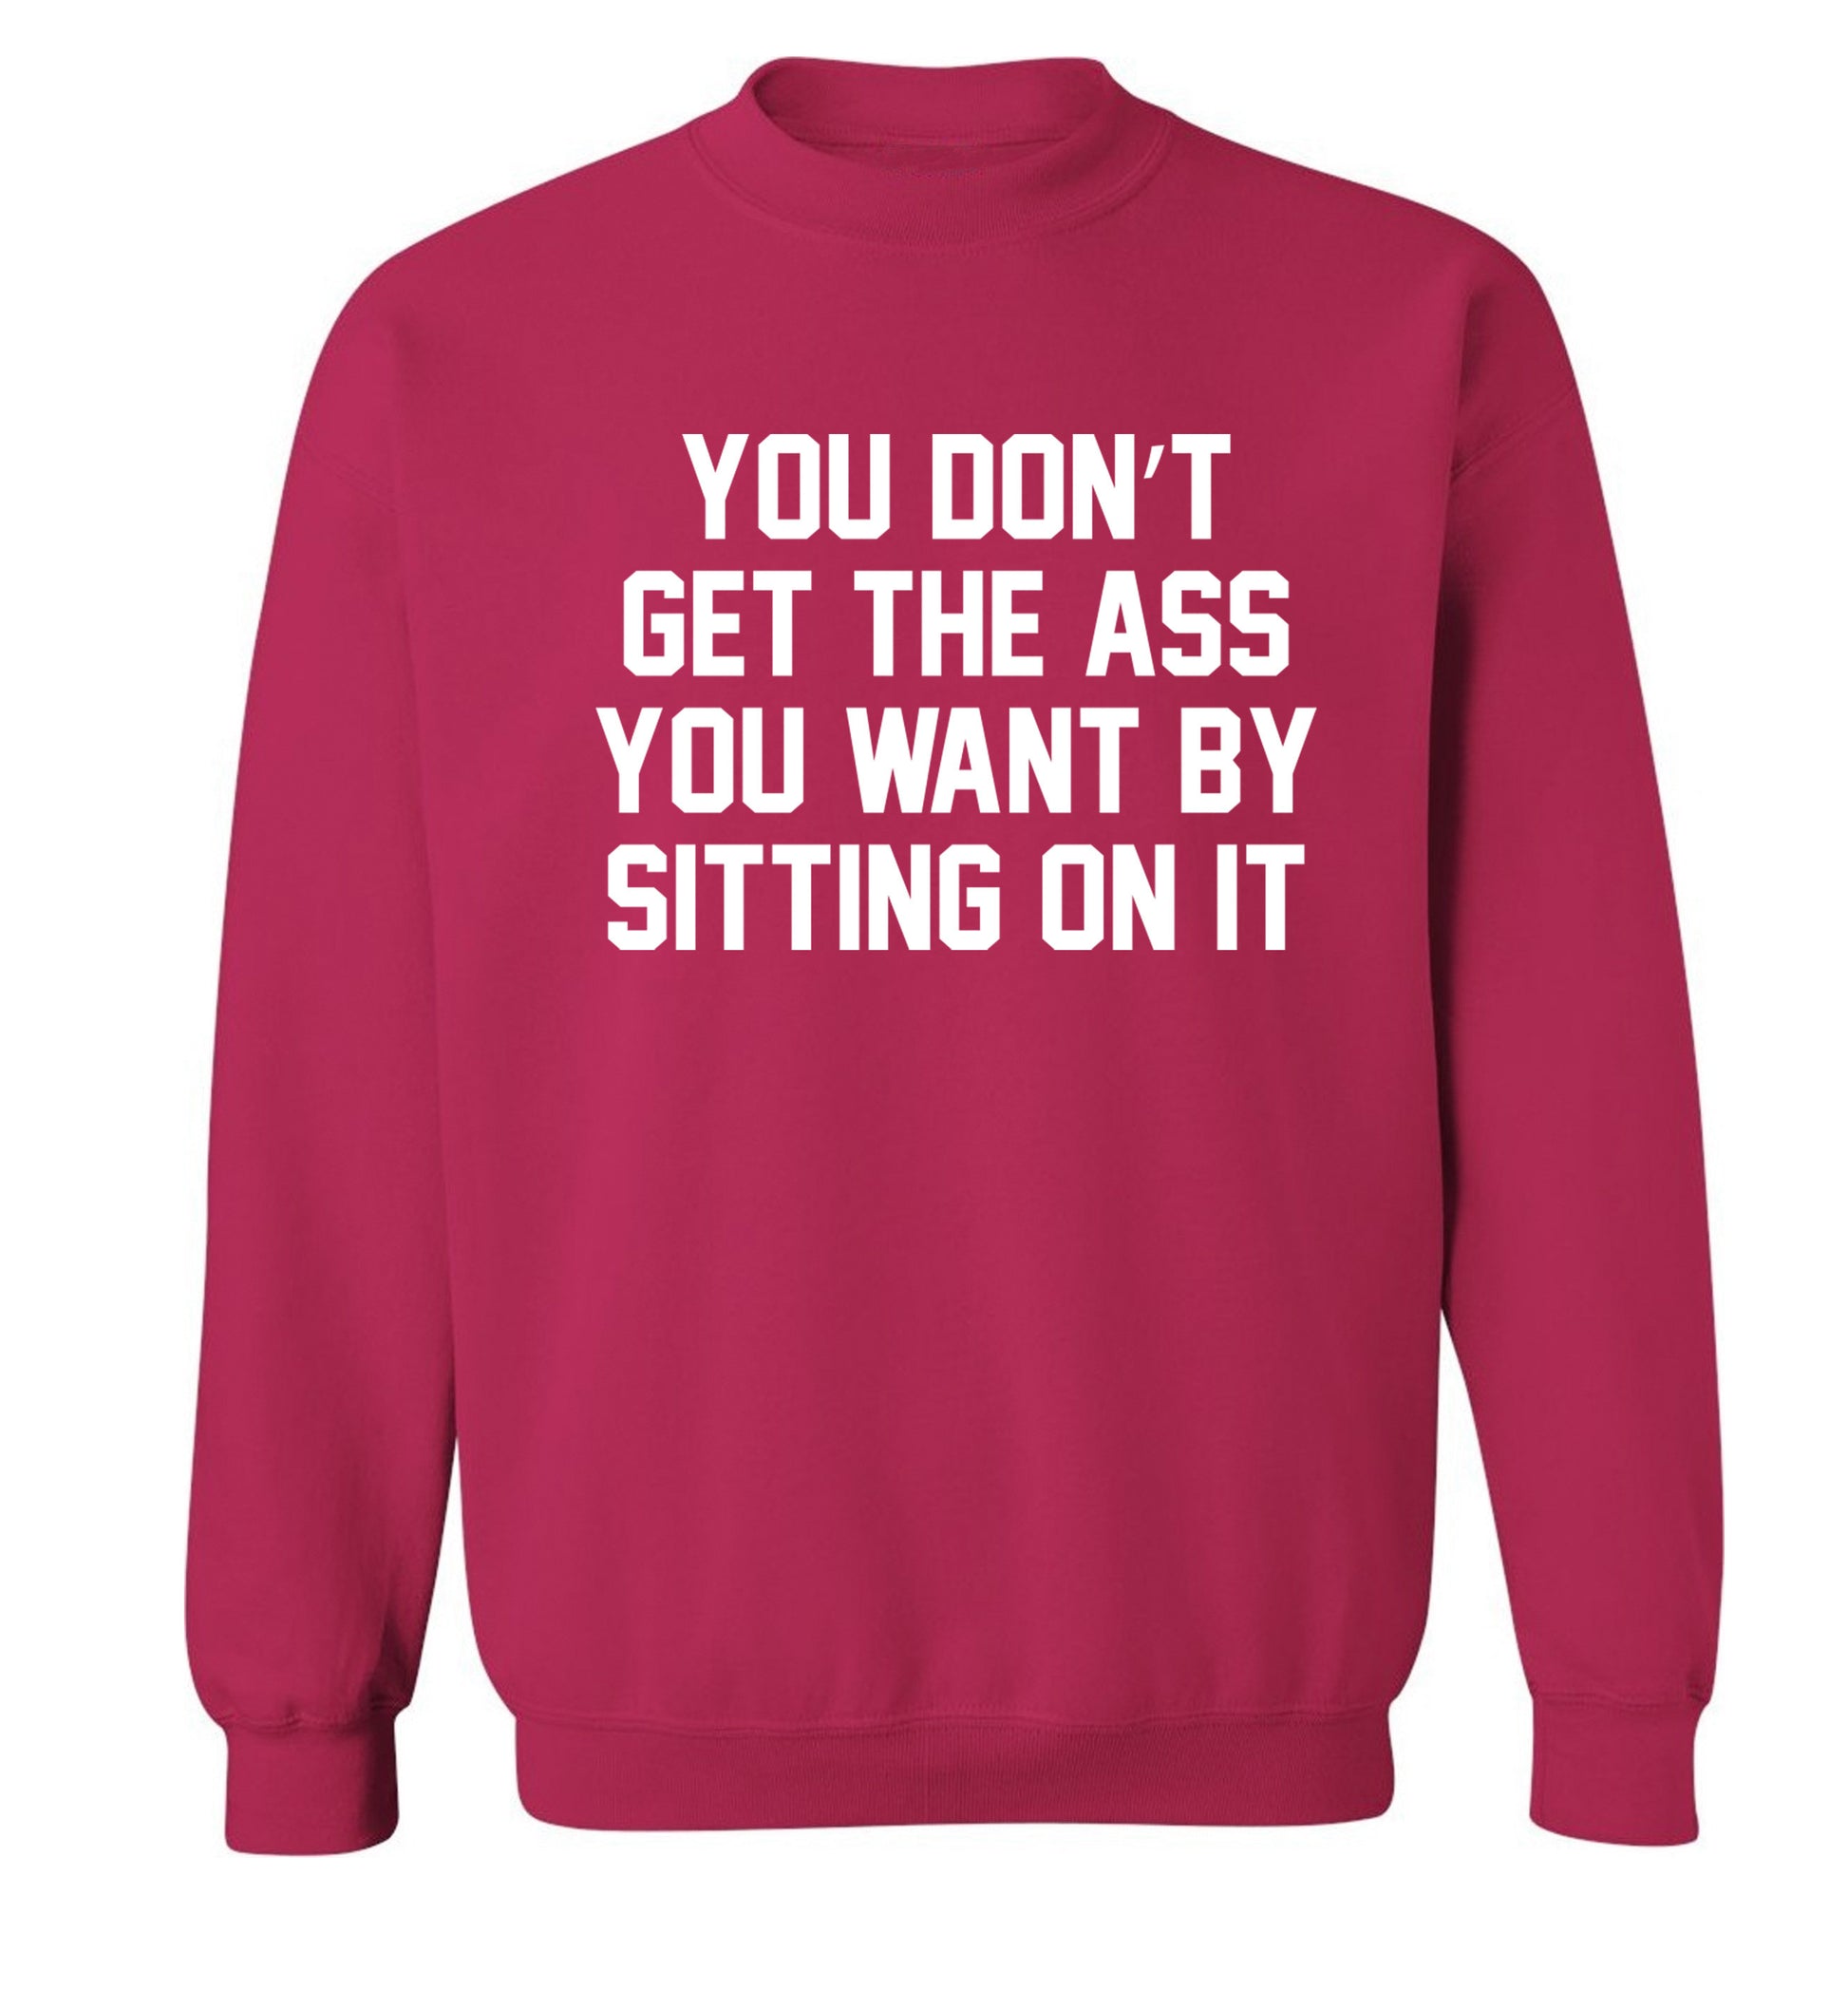 You don't get the ass you want by sitting on it Adult's unisex pink Sweater XL